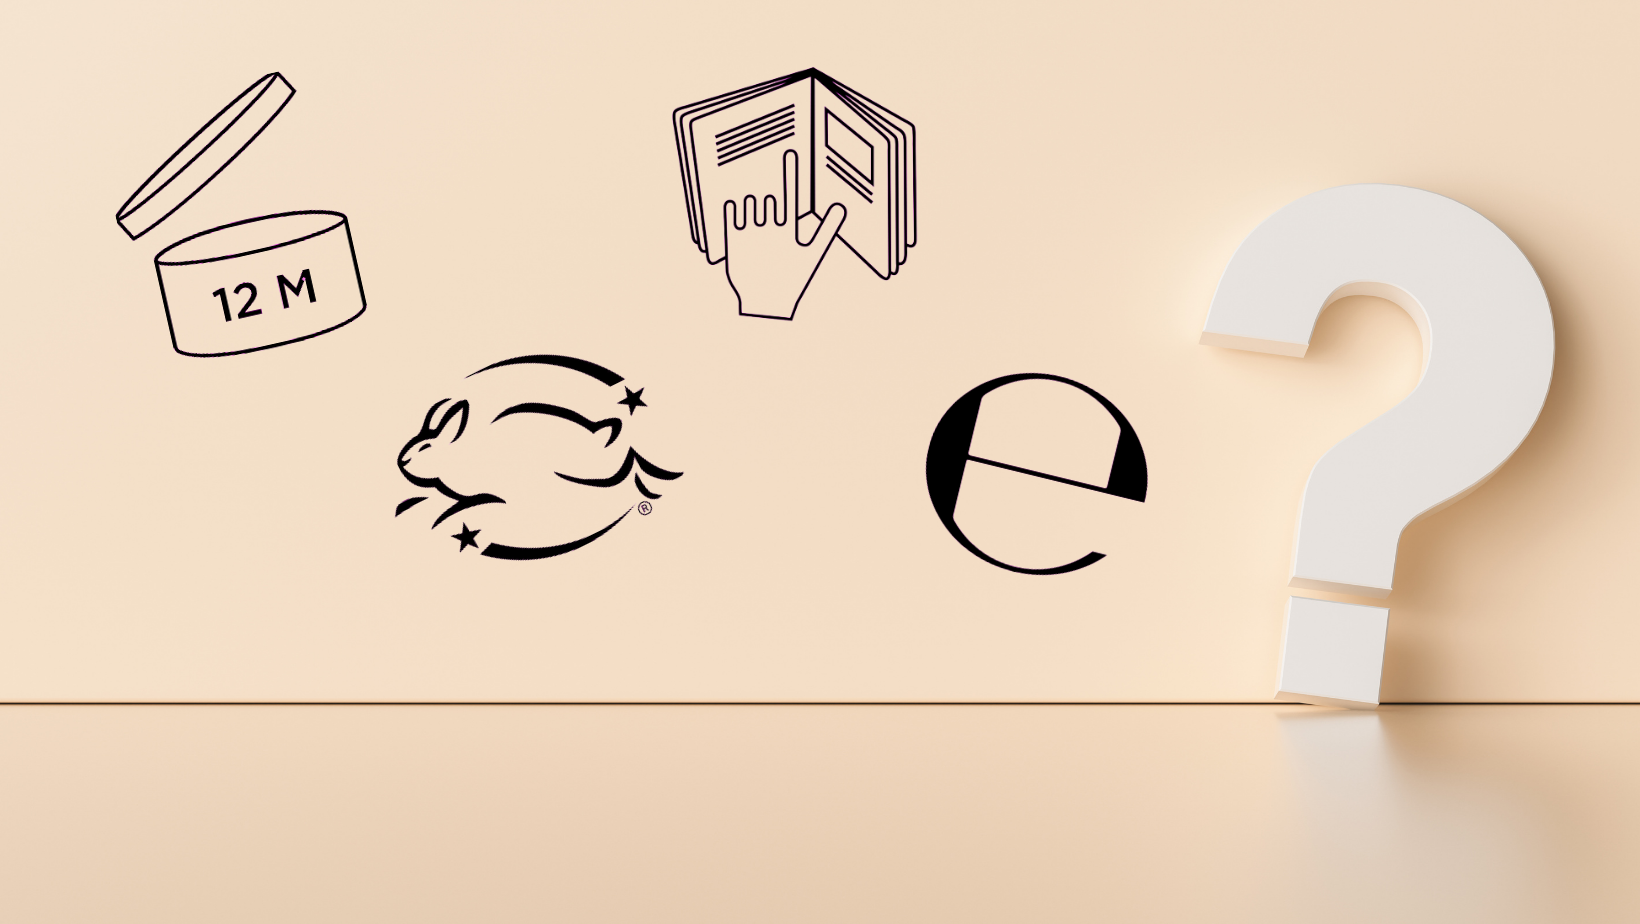 Question mark and Various Common Symbols seen on Cosmetic Packaging